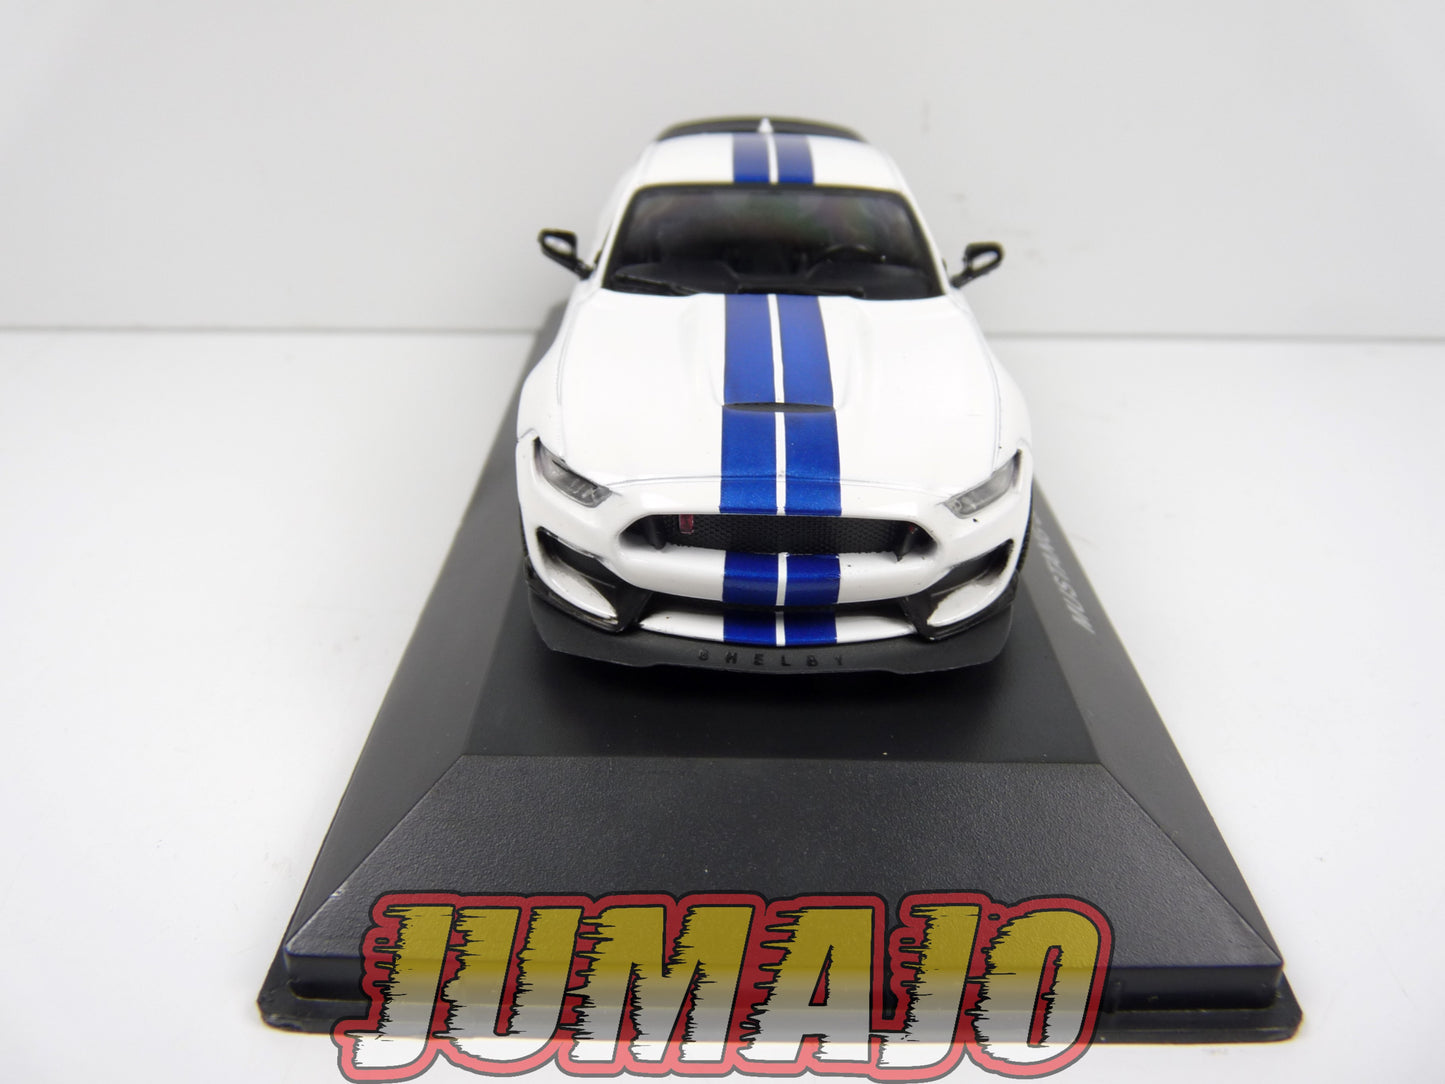 DIV39 voiture 1/43 IXO altaya Collections Mustang Ford Mustang Shelby GT350R 2016